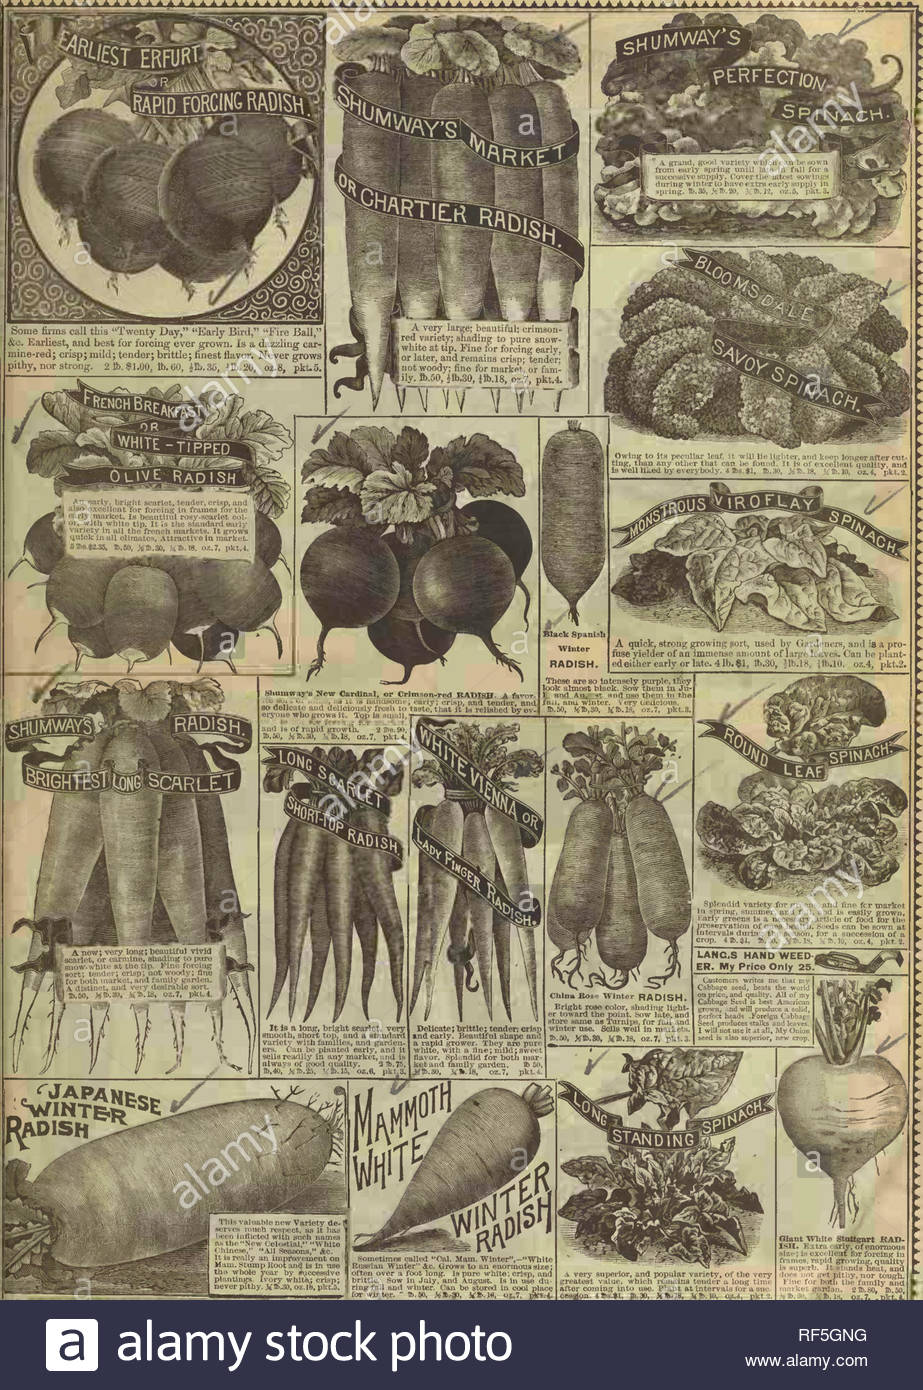 rh shumway garden guide nursery stock illinois rockford catalogs flowers seeds catalogs ve ables seeds catalogs f f iff f t y f f ygt v v f t r quotf f y y f rf gt f f y f t y rrgt v very supeiior and poptdar variety of the very gieatest value which remains tender a long time after ing tito use plajit at intervals for a snc giant thilte stattgart rad ish e3ira early of enormous size is excellent for forcing in frames rapid grooving quallf is superb it stands heat anl does not f80 lb50 hbgt3 xih oz7 pkt id ft k c please RF5GNG